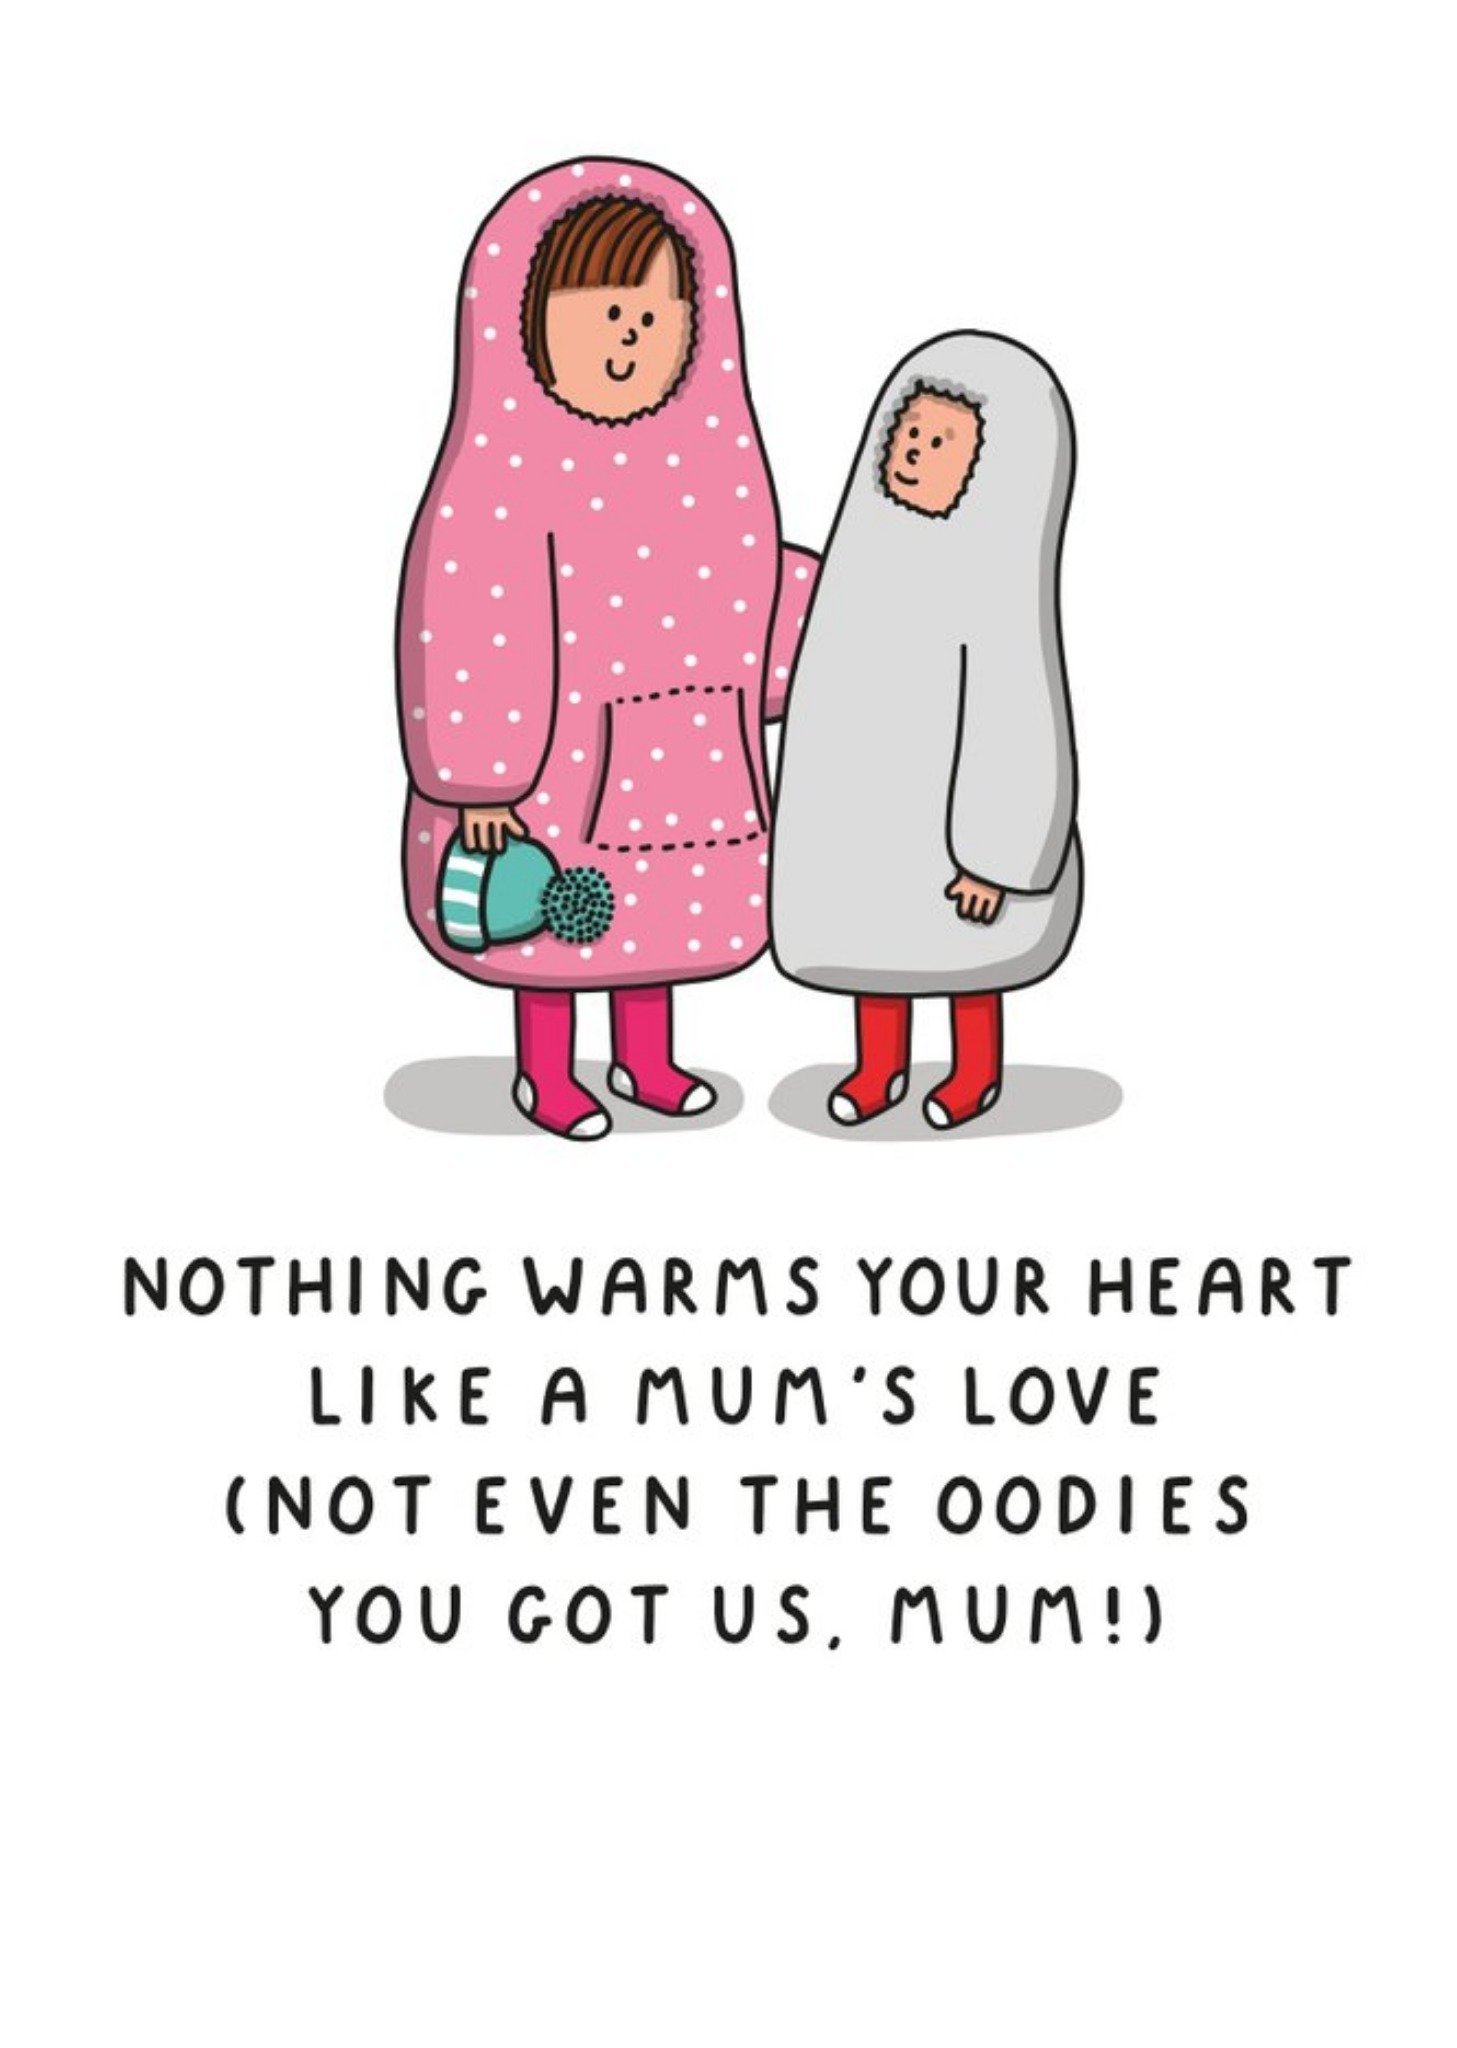 Moonpig Illustration Of Mother And Child Wearing Oodies Humorous Mother's Day Card, Large